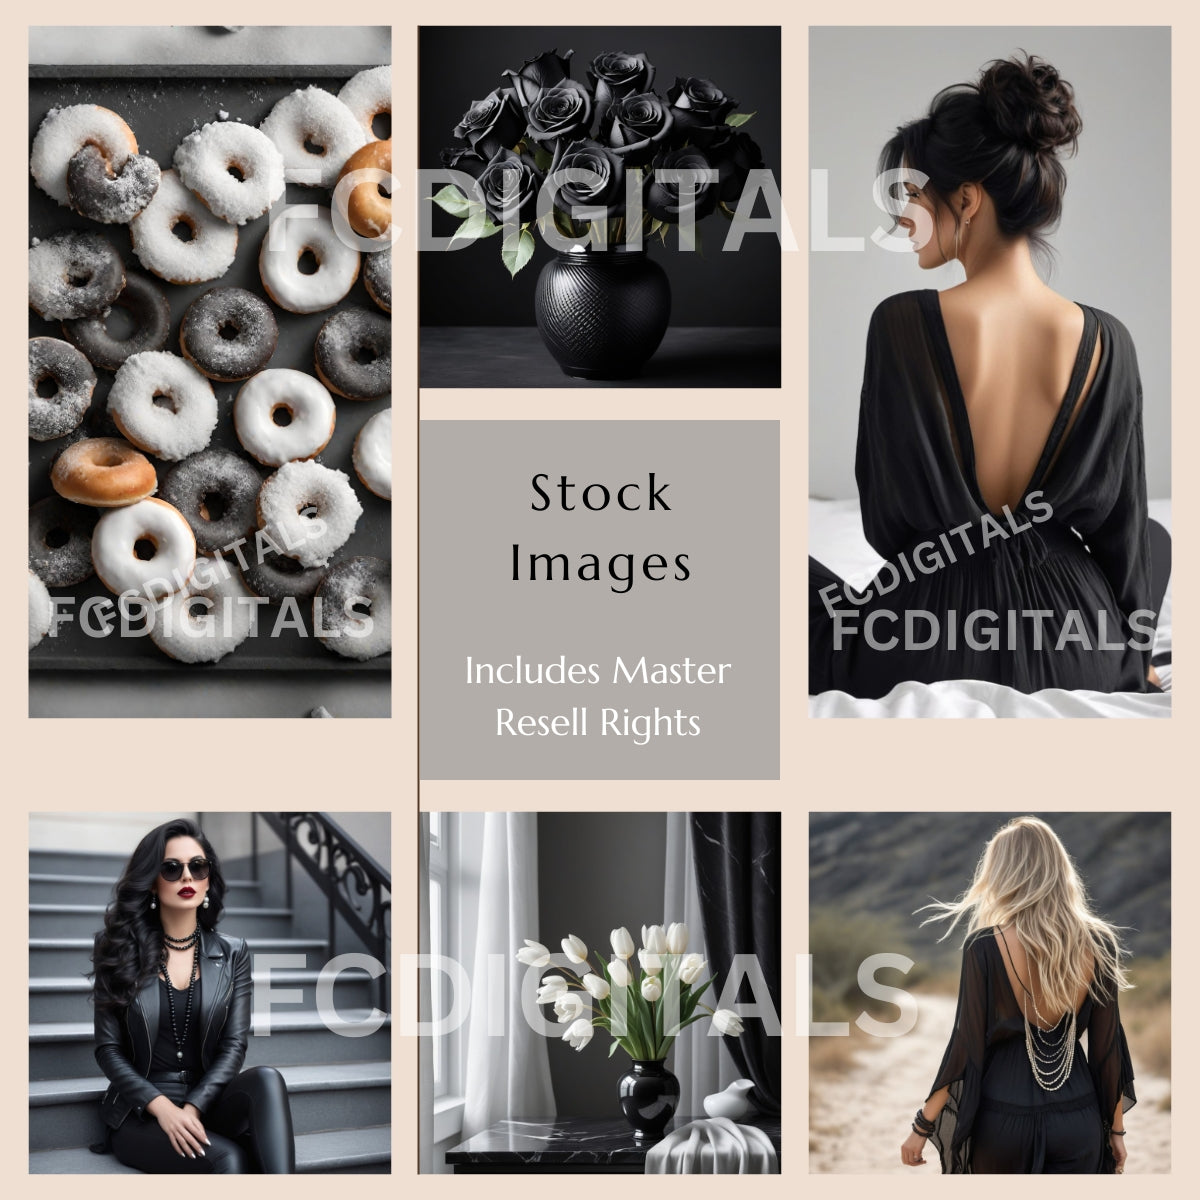 Stock Images with Master Resell Rights, Digital Marketing Business, Commercial Use Images